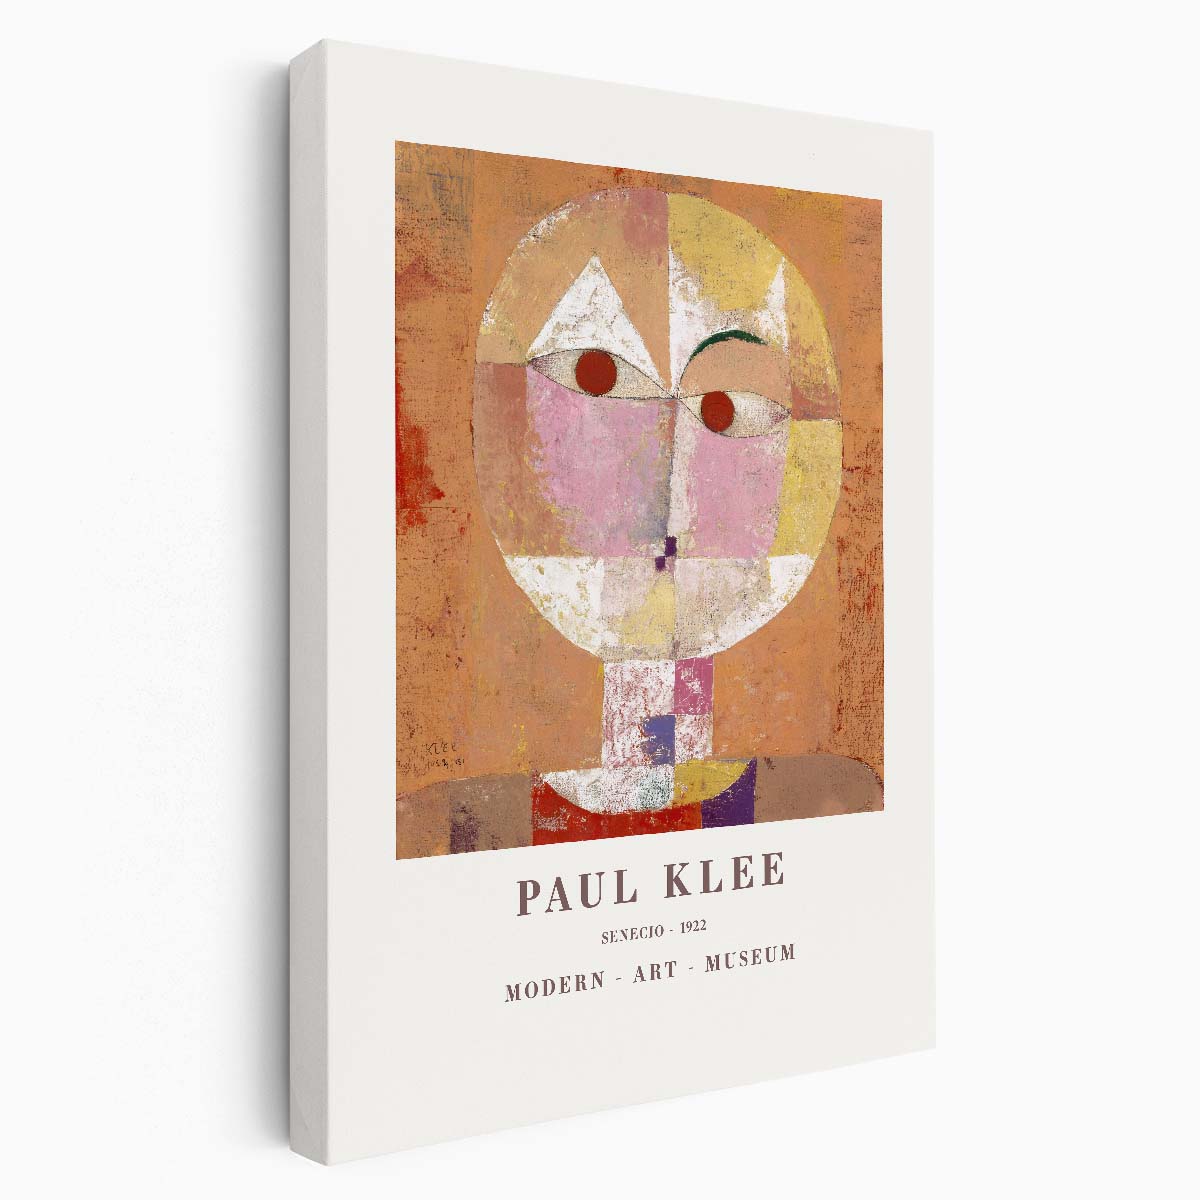 Paul Klee's 1922 Abstract Senecio Baldgreis Oil Painting Masterpiece by Luxuriance Designs, made in USA